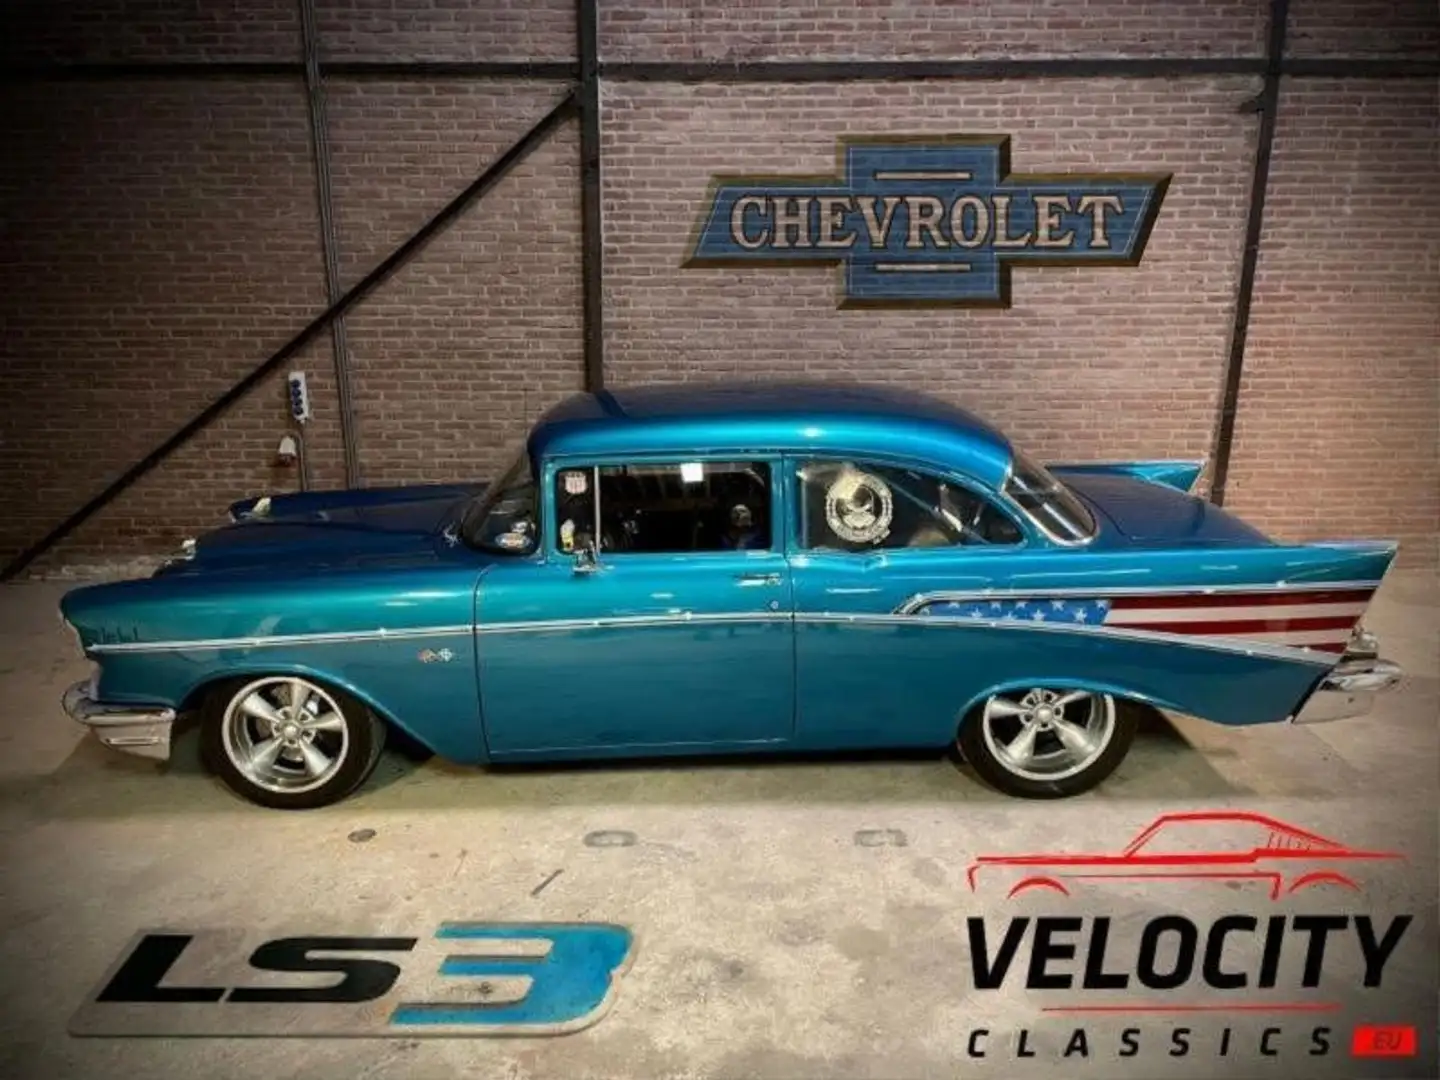 Chevrolet Bel Air 1957 Bel Air Pro Touring 7.0 ltr. price reduction! Azul - 1